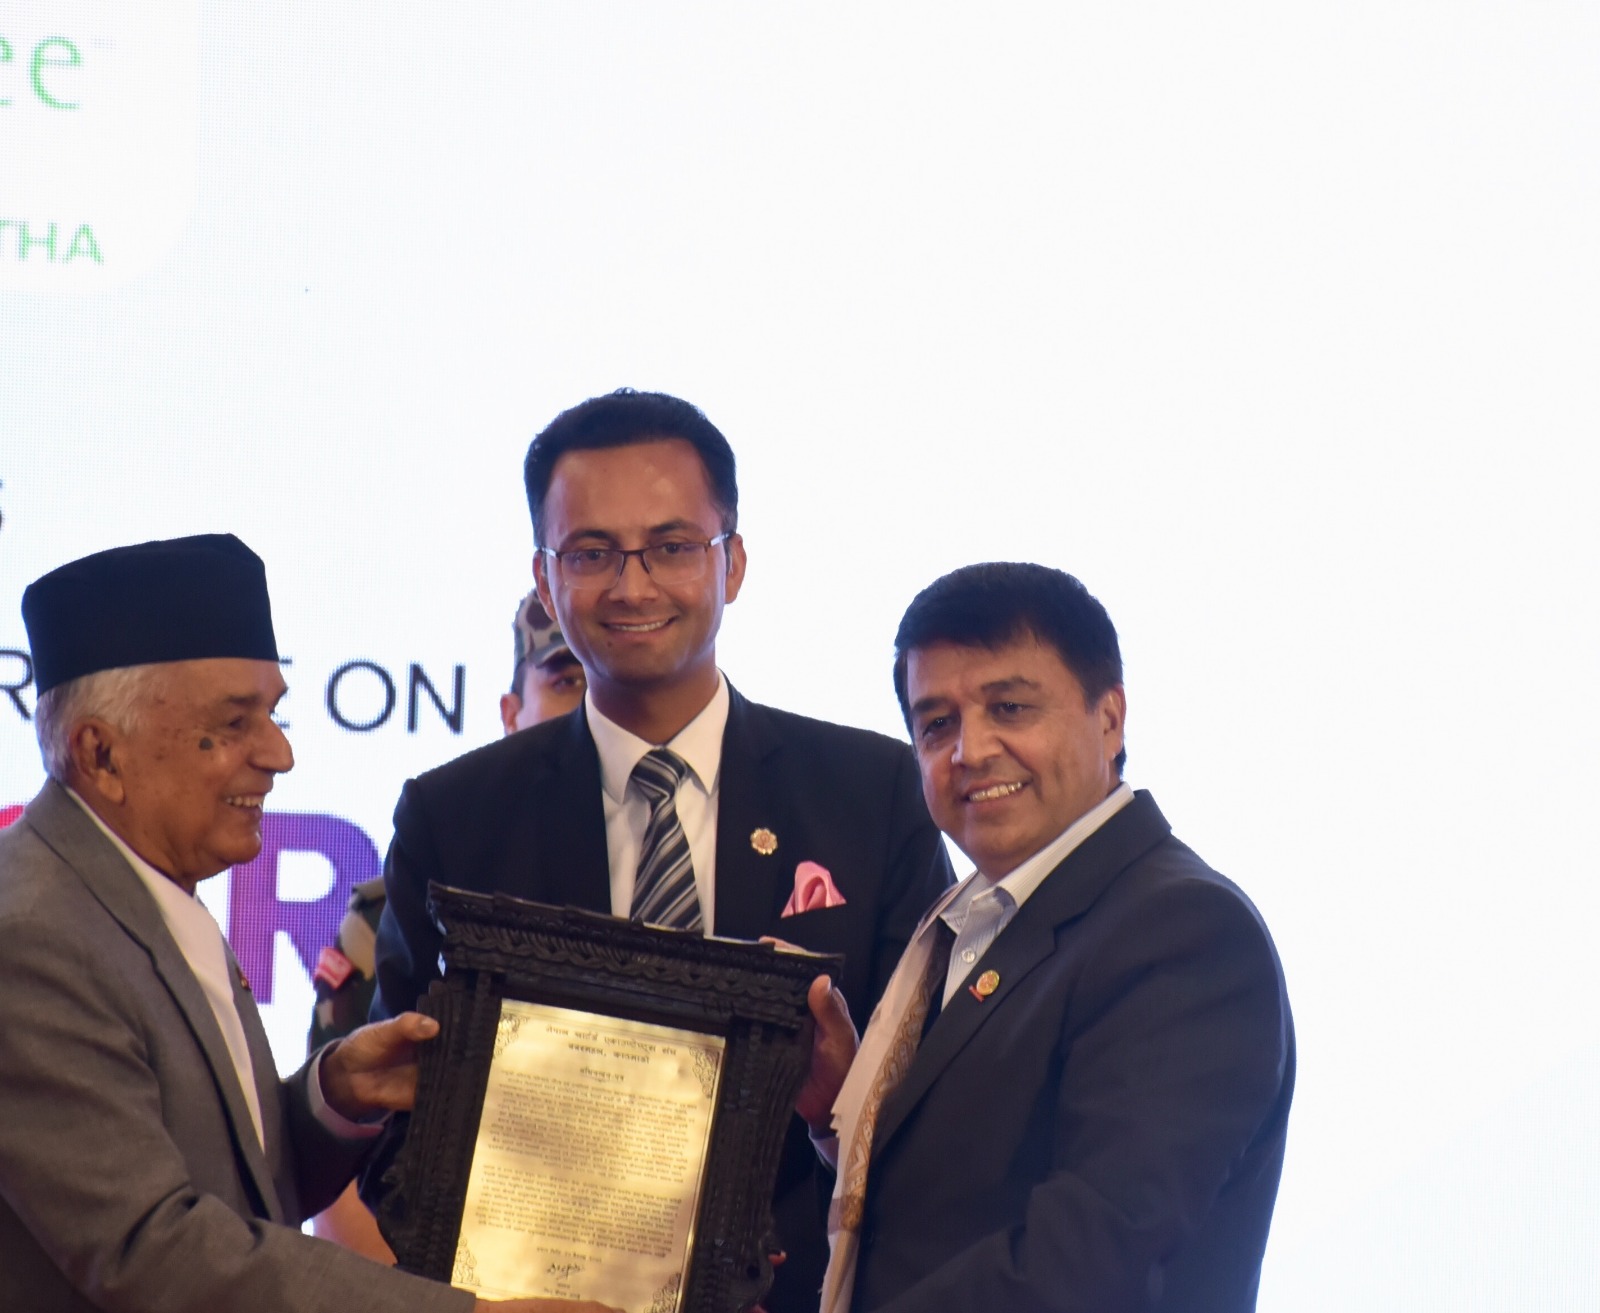 FNCCI President Dhakal receives ‘Corporate Excellence Award’